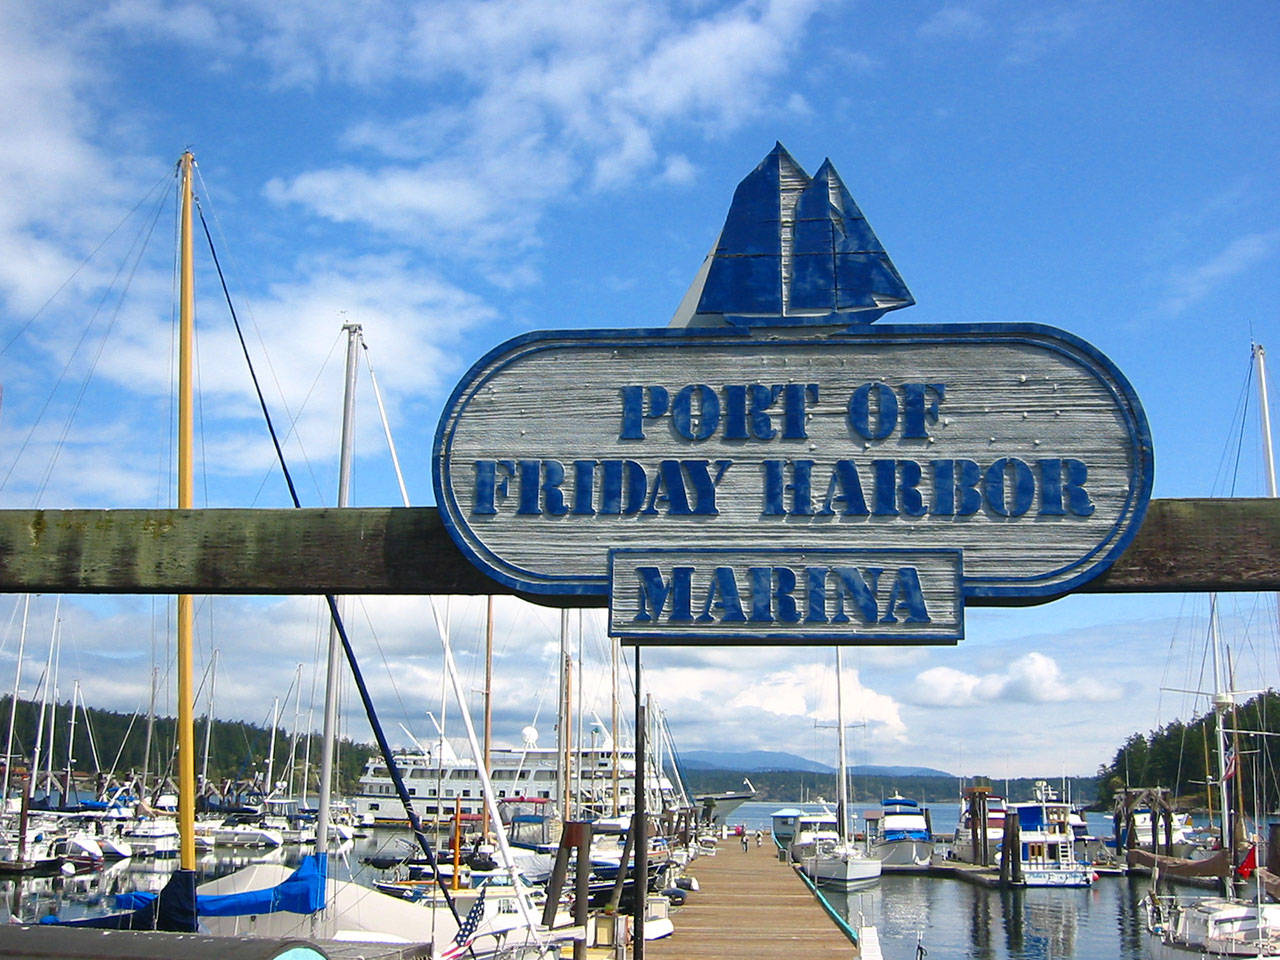 Special Port of Friday Harbor meeting on June 8